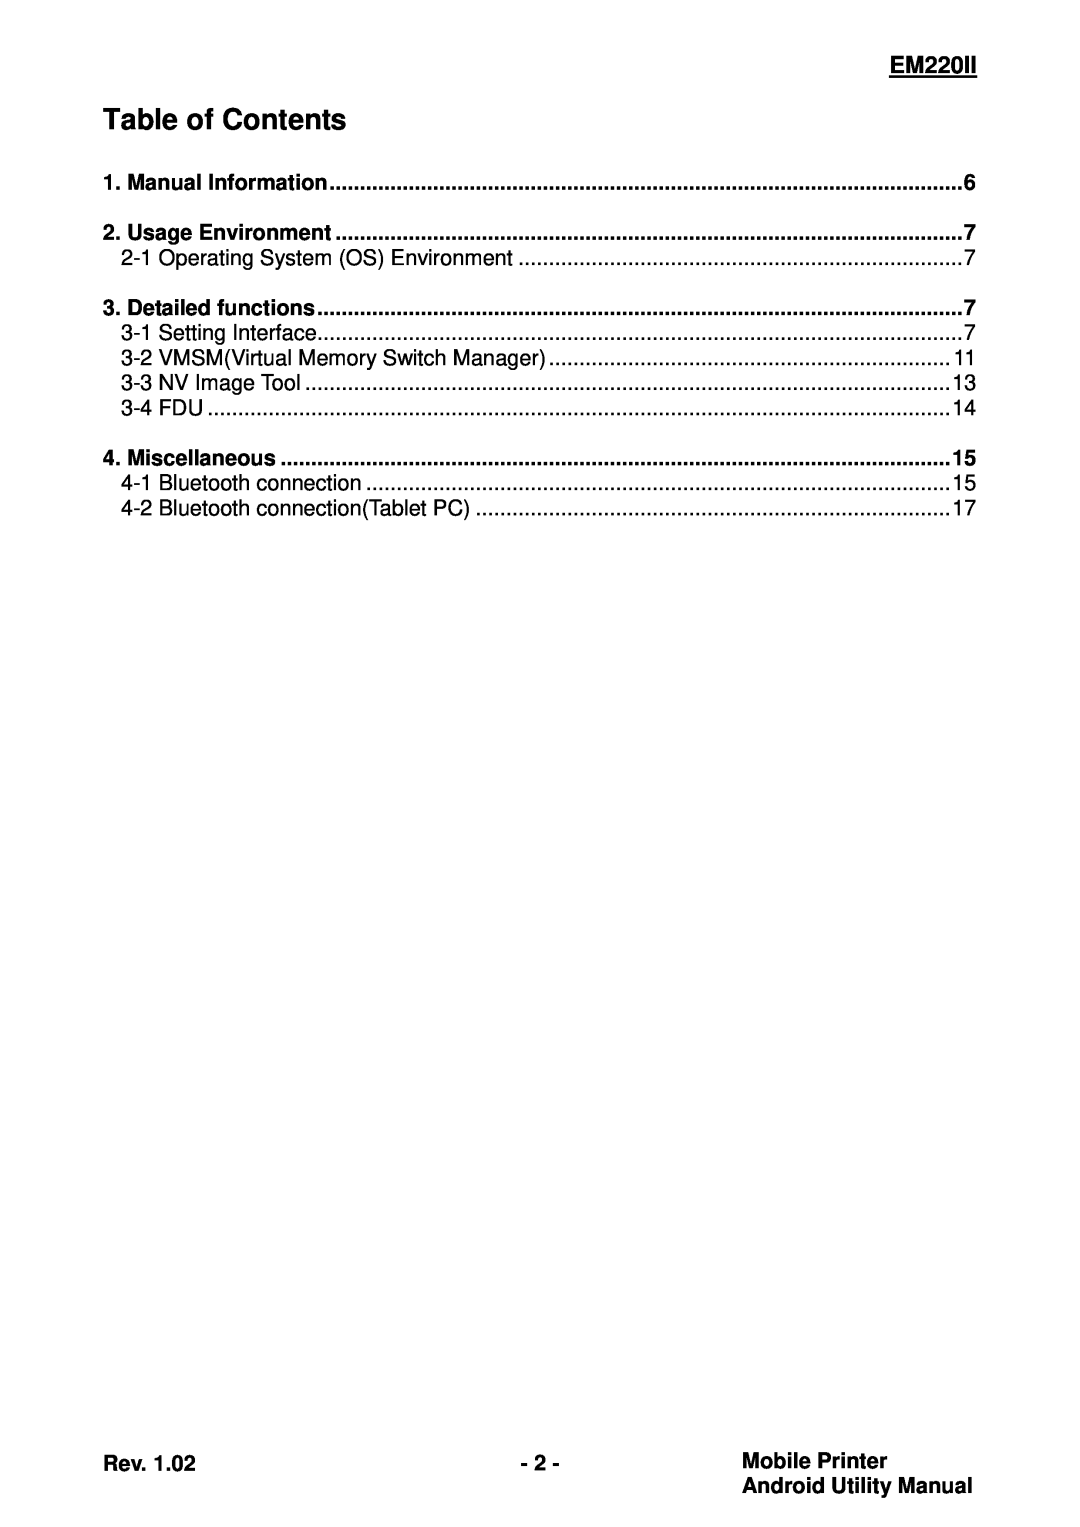 Zebra Technologies EM220II Table of Contents, Miscellaneous, Mobile Printer, Android Utility Manual, Manual Information 